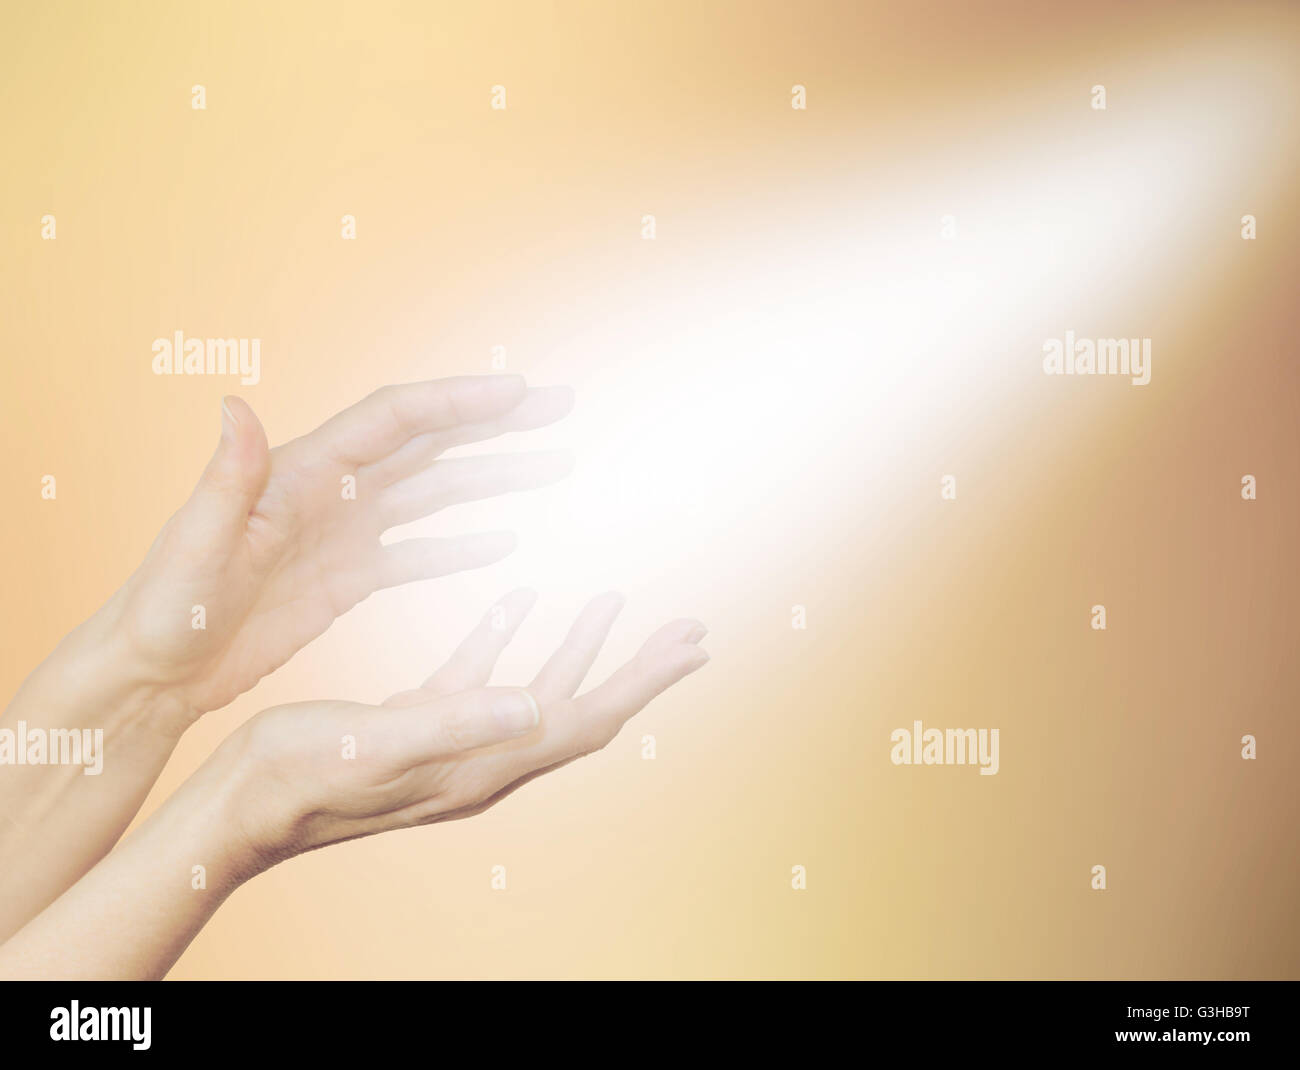 Female healing hands outstretched with bright shaft of light beaming out and up on a pale golden background Stock Photo